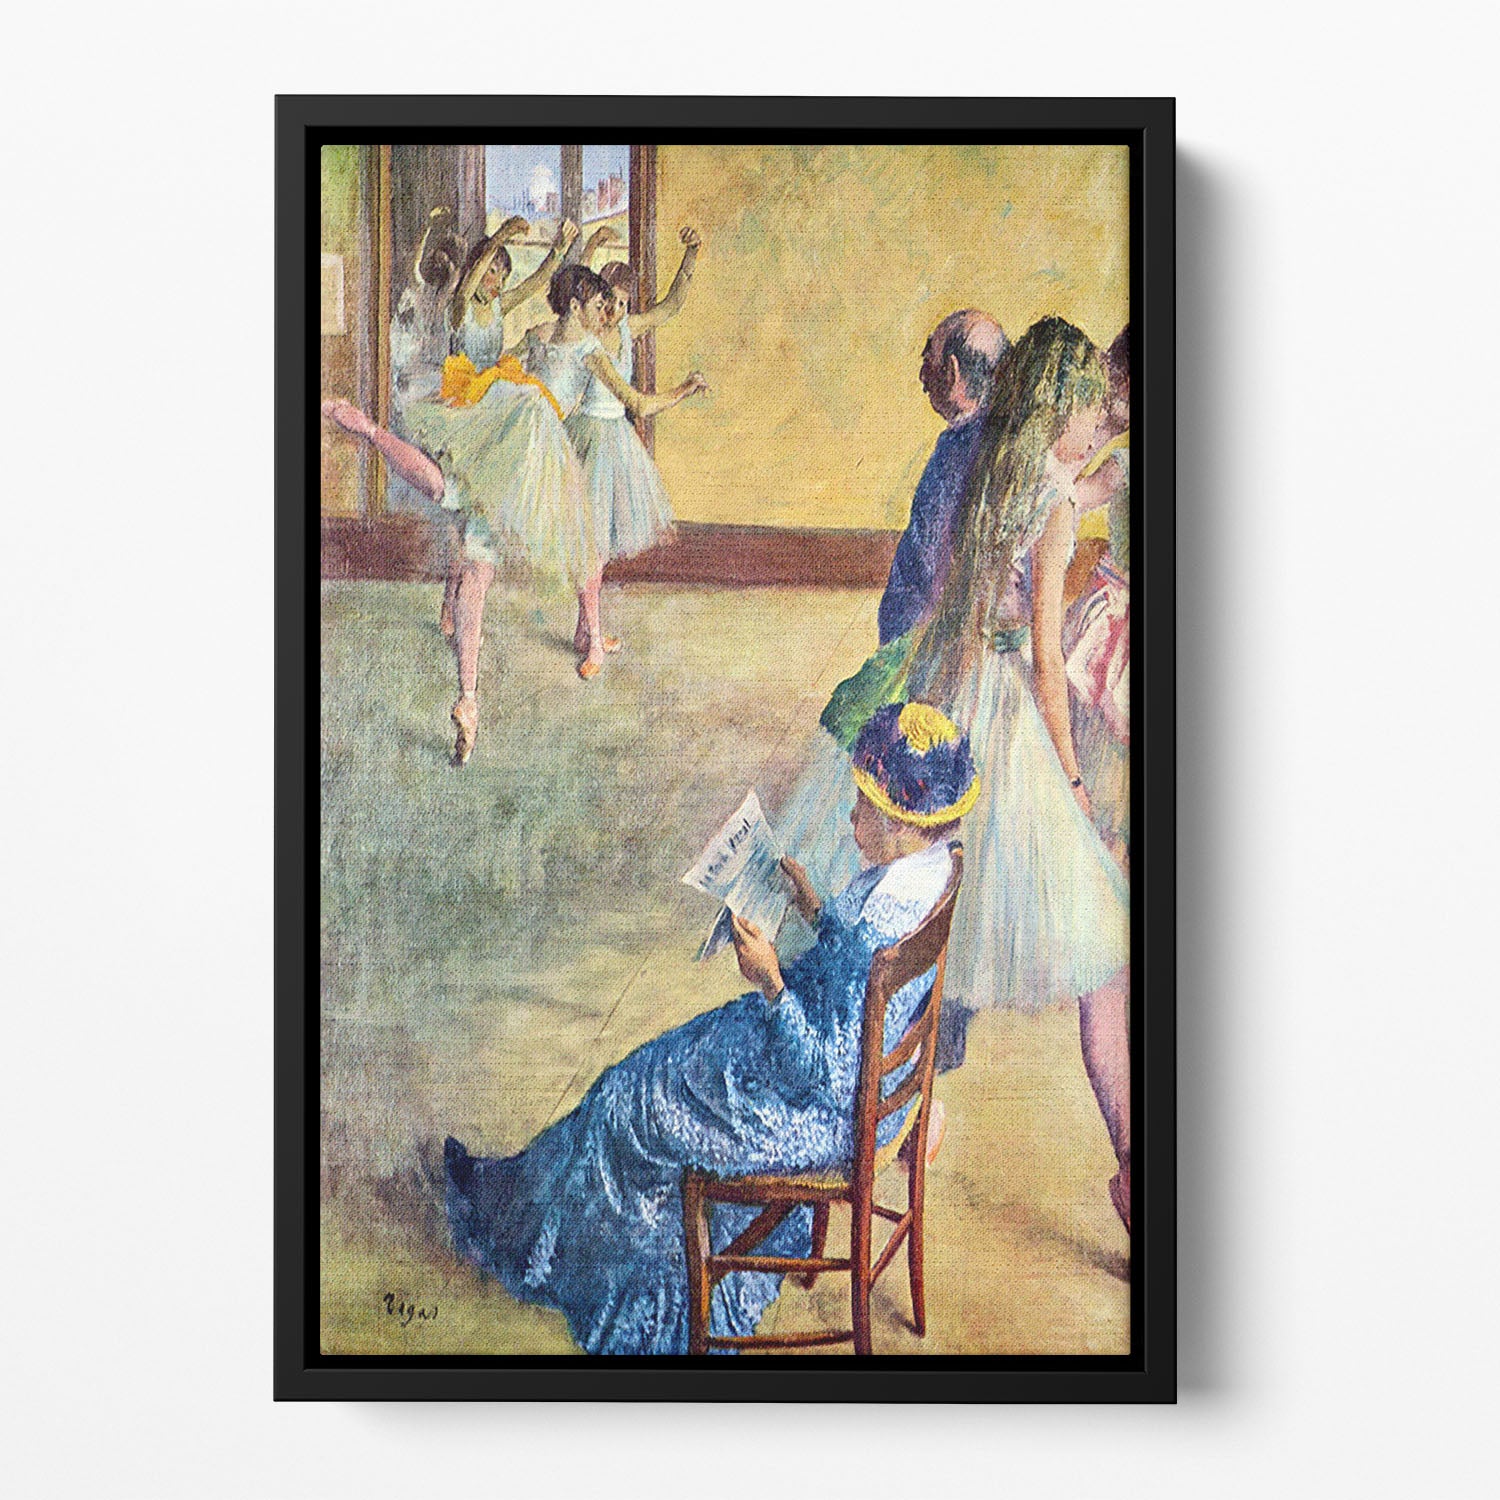 During the dance lessons Madame Cardinal by Degas Floating Framed Canvas